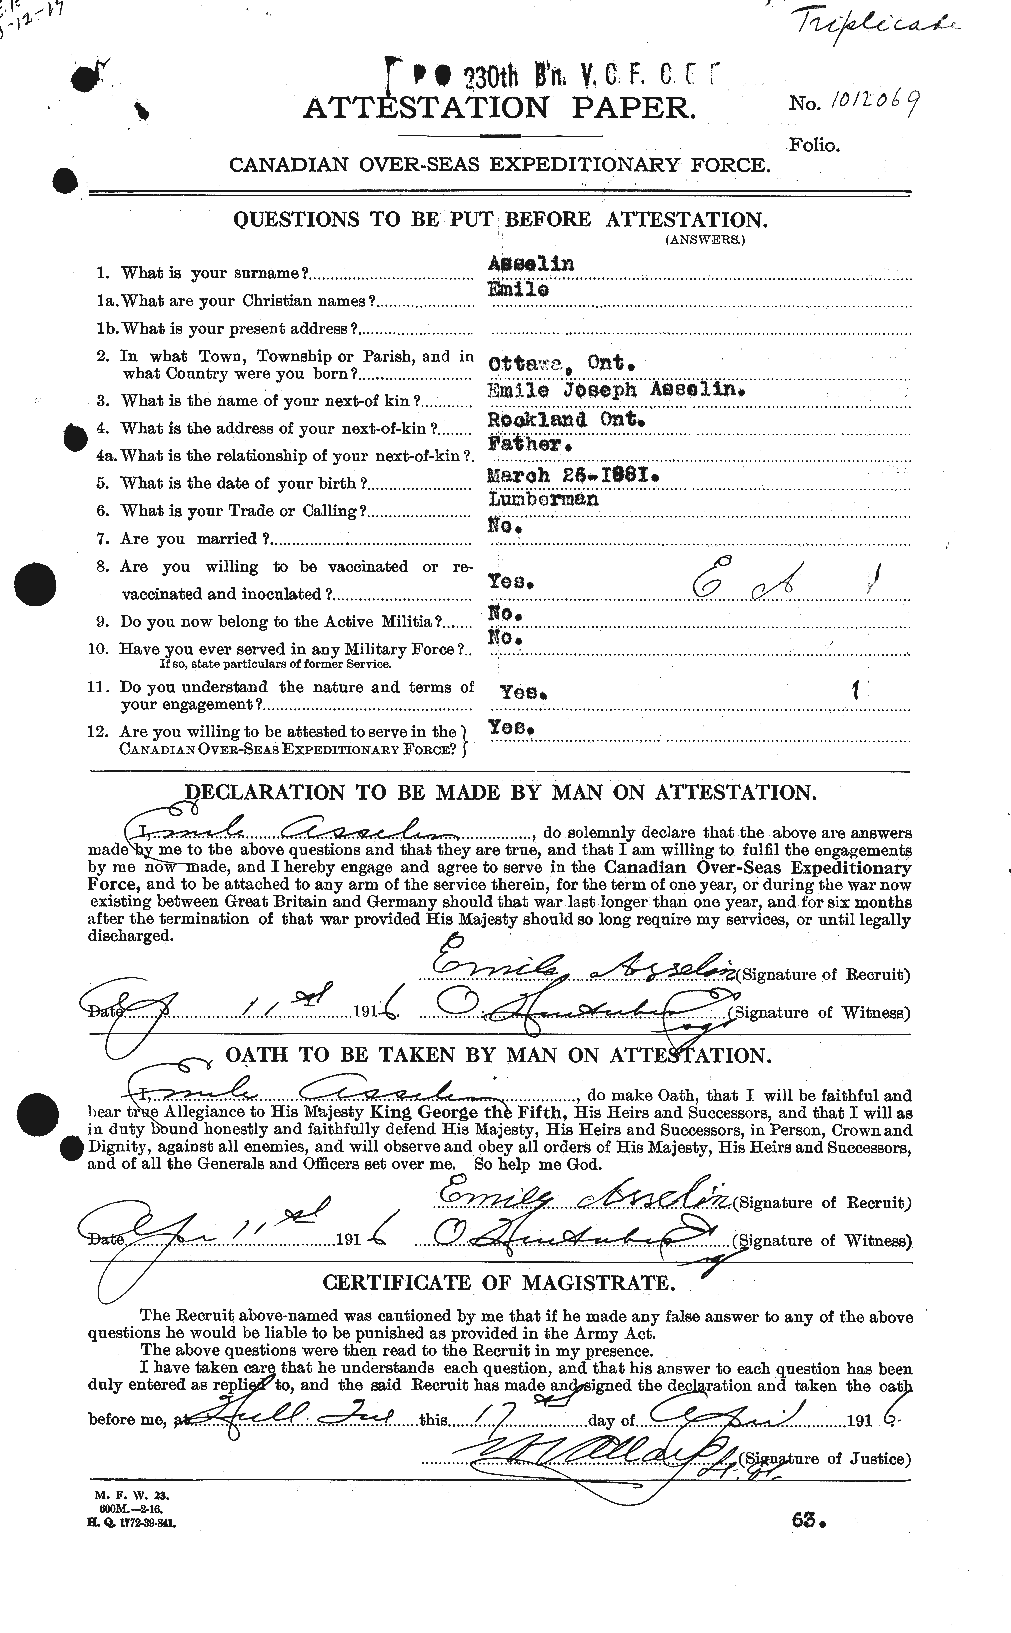 Personnel Records of the First World War - CEF 223506a